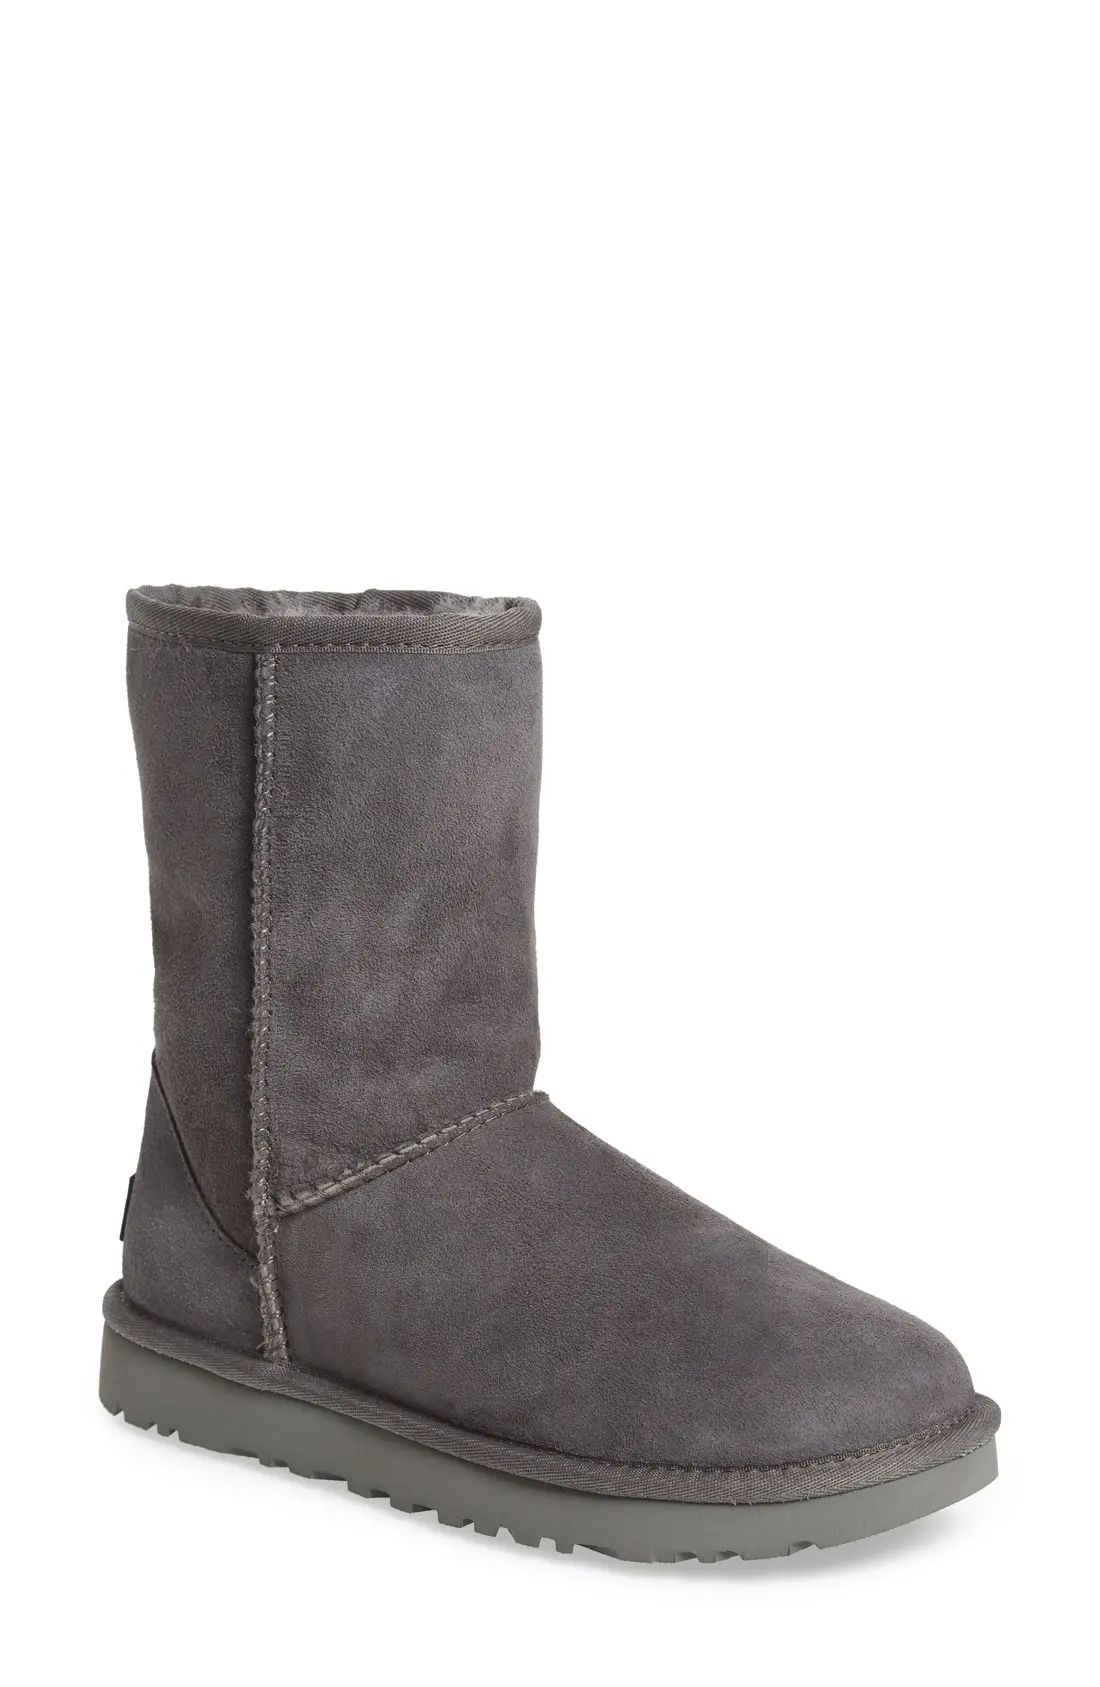 UGG(R) Classic II Genuine Shearling Lined Short Boot in Grey Suede at Nordstrom, Size 11 | Nordstrom